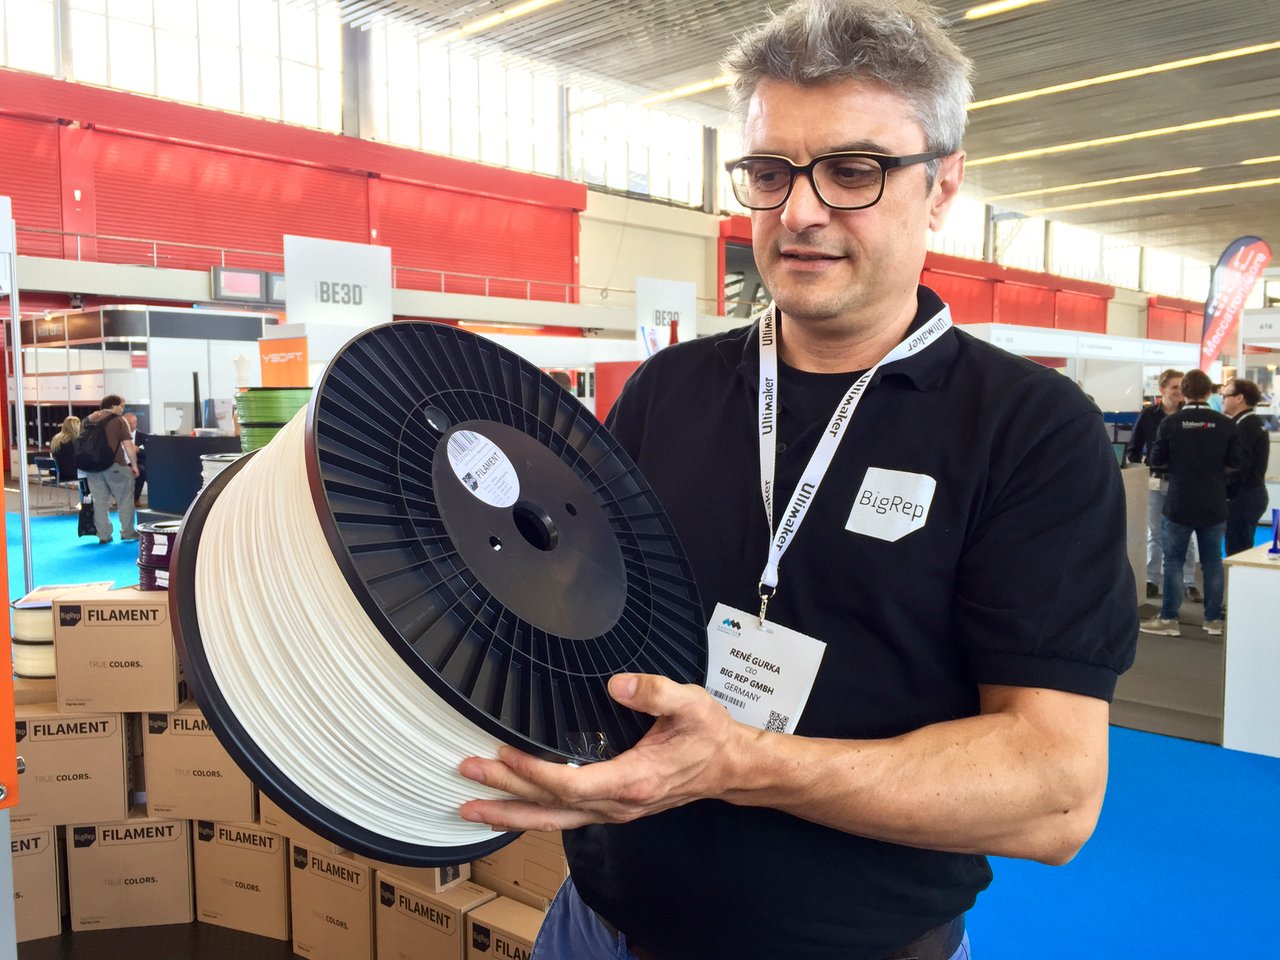  BigRep CEO Rene Gurka with a rather large spool of 3D printer filament 